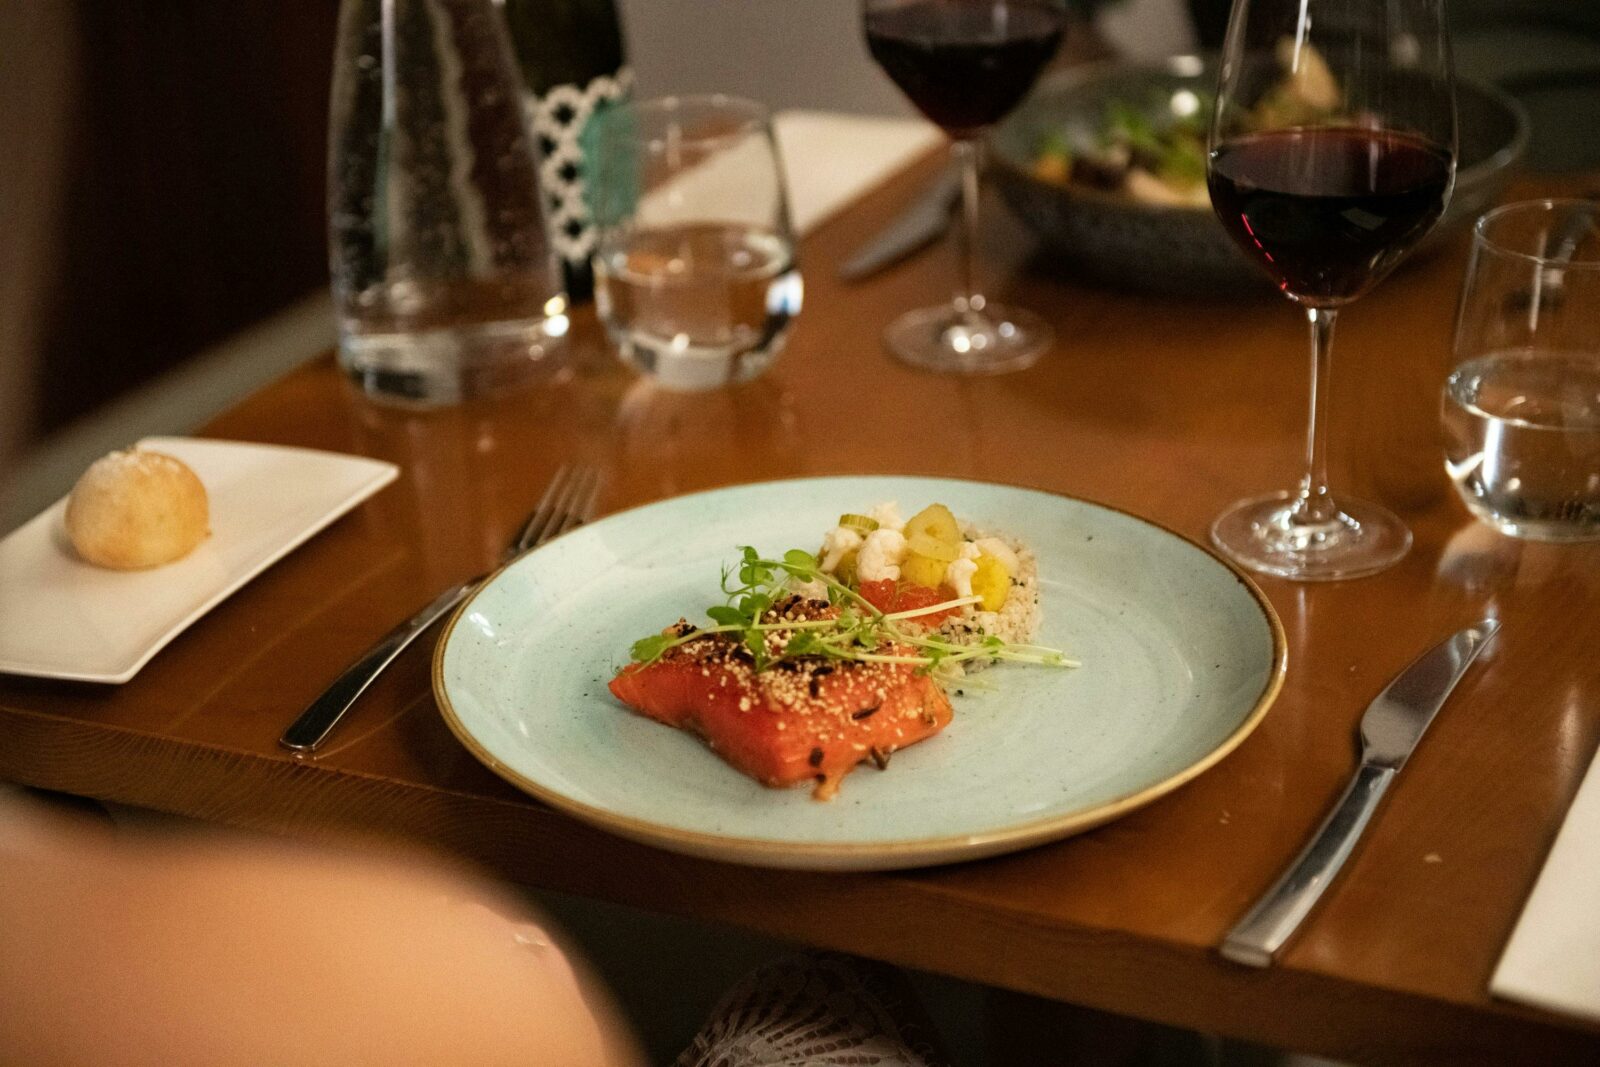 Photo of a dinner meal in restaurant